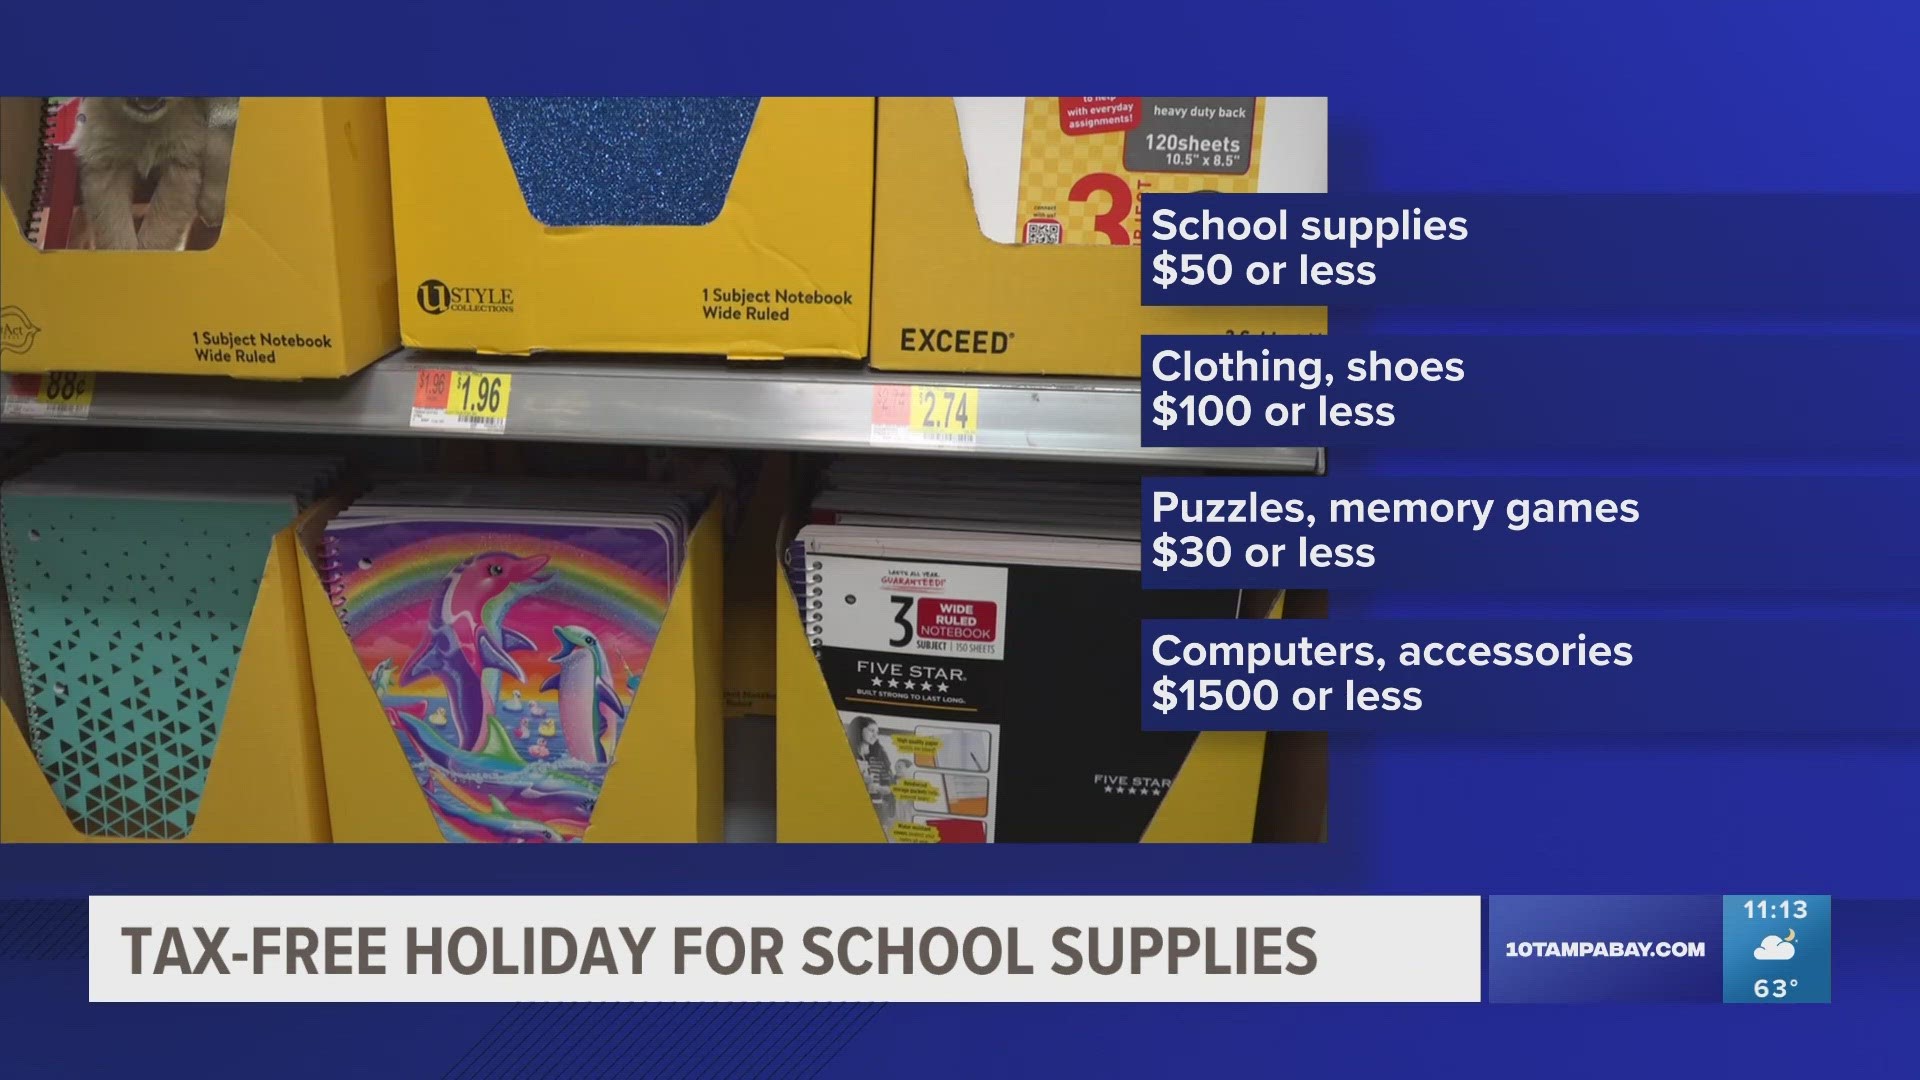 Florida Sales Tax Holiday on Qualifying Purchases of School